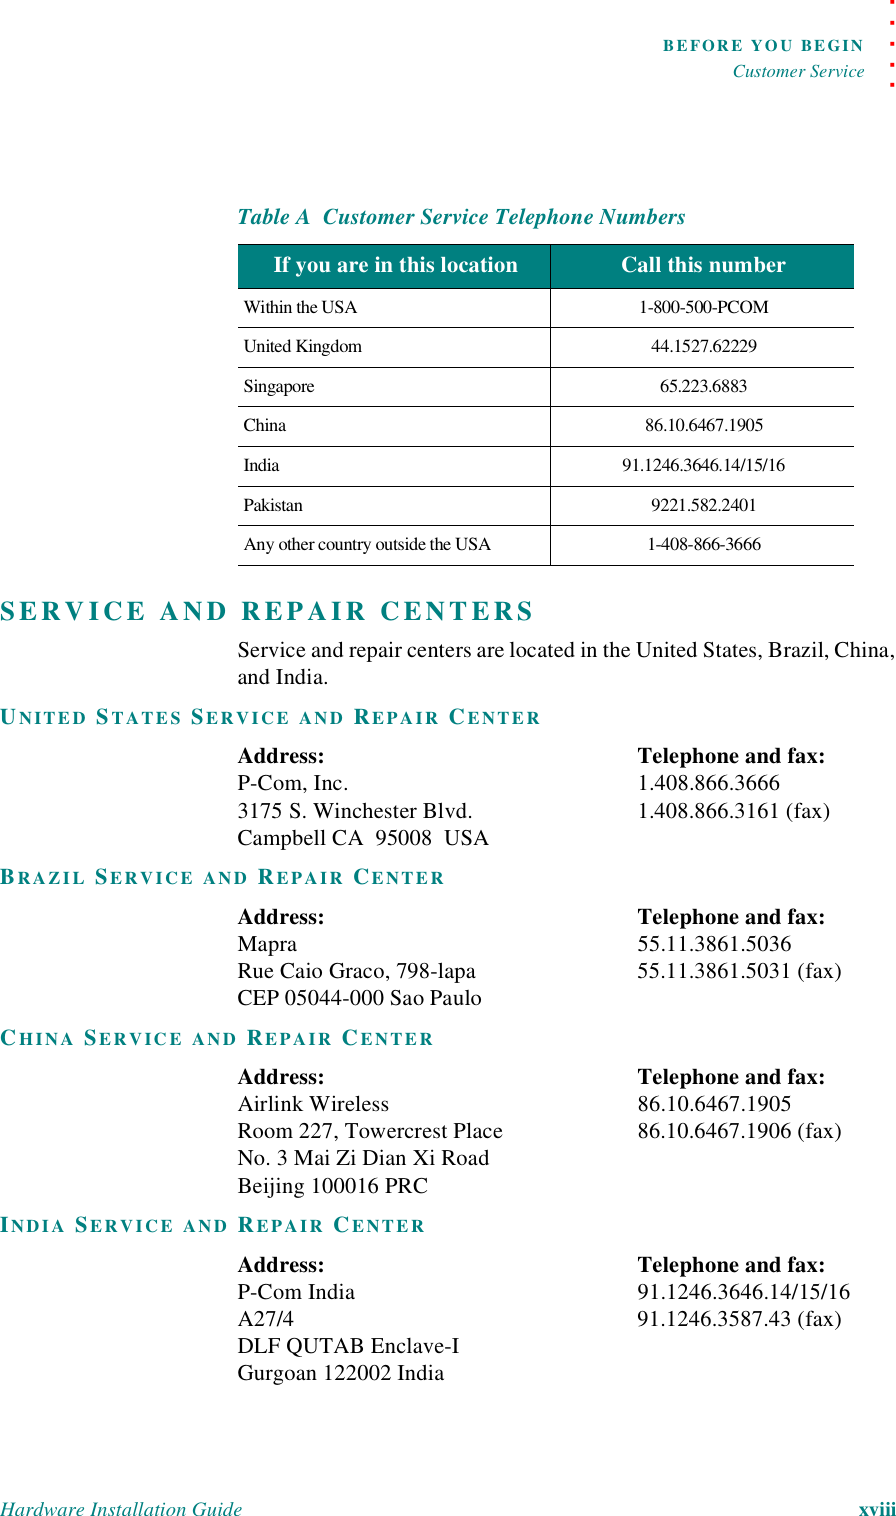 . . . . .BEFORE YOU BEGINCustomer ServiceHardware Installation Guide   xviii SERVICE AND REPAIR CENTERSService and repair centers are located in the United States, Brazil, China, and India.UNITED STATES SERVICE AND REPAIR CENTERAddress: Telephone and fax:P-Com, Inc. 1.408.866.36663175 S. Winchester Blvd. 1.408.866.3161 (fax)Campbell CA  95008  USABRAZIL SERVICE AND REPAIR CENTERAddress: Telephone and fax:Mapra 55.11.3861.5036Rue Caio Graco, 798-lapa 55.11.3861.5031 (fax)CEP 05044-000 Sao PauloCHINA SERVICE AND REPAIR CENTERAddress: Telephone and fax:Airlink Wireless 86.10.6467.1905Room 227, Towercrest Place 86.10.6467.1906 (fax)No. 3 Mai Zi Dian Xi RoadBeijing 100016 PRCINDIA SERVICE AND REPAIR CENTERAddress: Telephone and fax:P-Com India 91.1246.3646.14/15/16A27/4 91.1246.3587.43 (fax)DLF QUTAB Enclave-IGurgoan 122002 IndiaTable A  Customer Service Telephone NumbersIf you are in this location Call this numberWithin the USA 1-800-500-PCOMUnited Kingdom 44.1527.62229Singapore 65.223.6883China 86.10.6467.1905India 91.1246.3646.14/15/16Pakistan 9221.582.2401Any other country outside the USA 1-408-866-3666